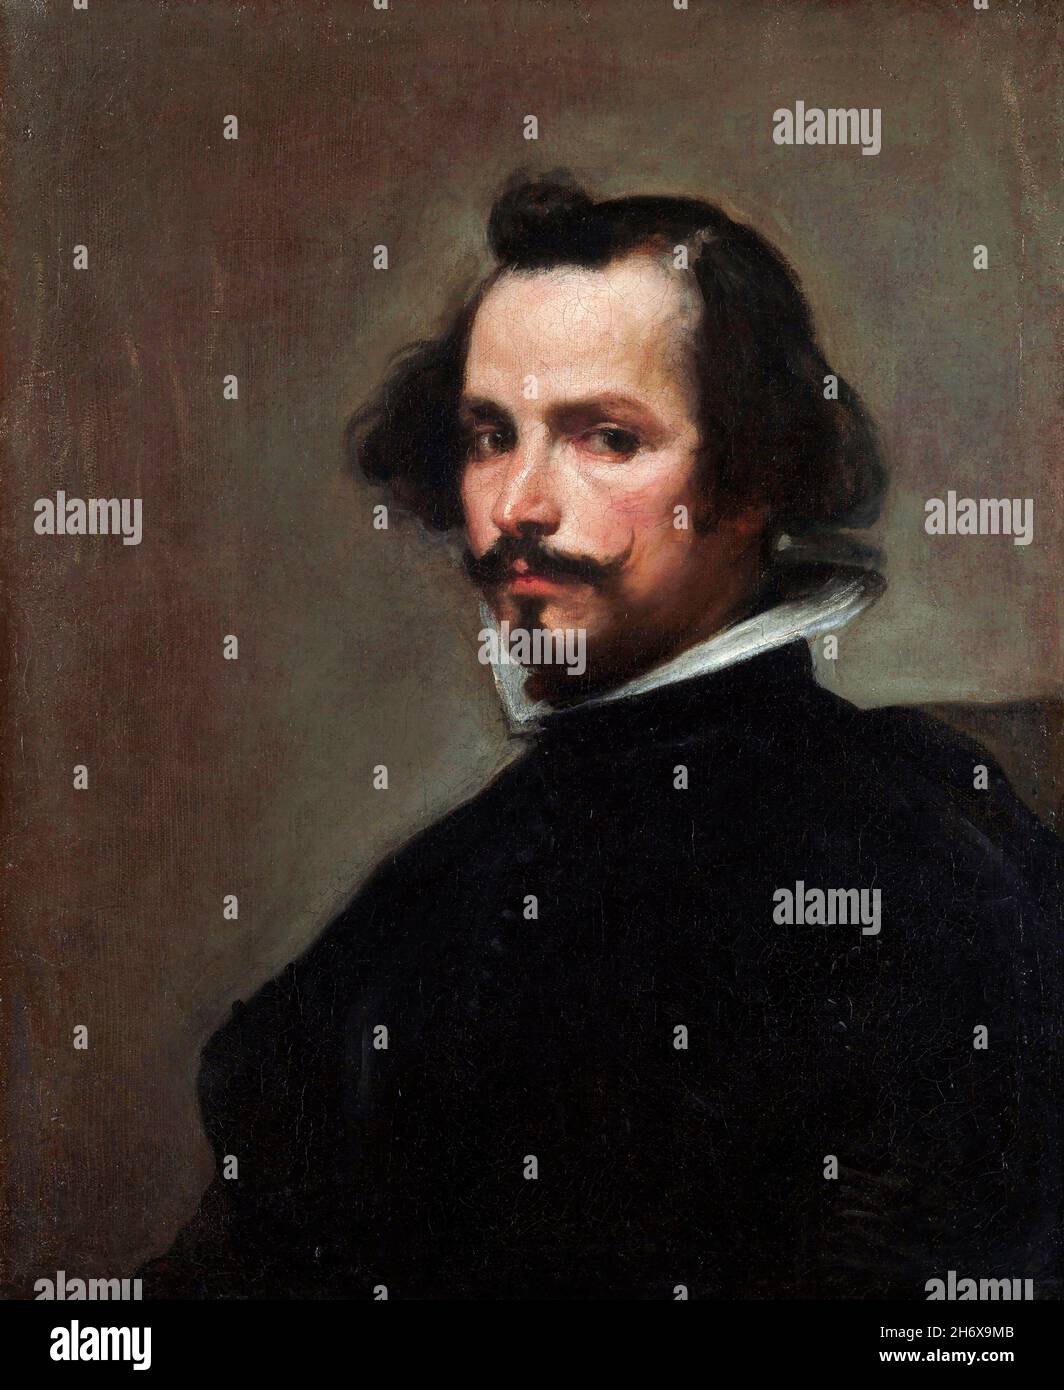 Portrait of a Man by Diego Velazquez (1599-1660), oil on canvas, c. 1650 Stock Photo